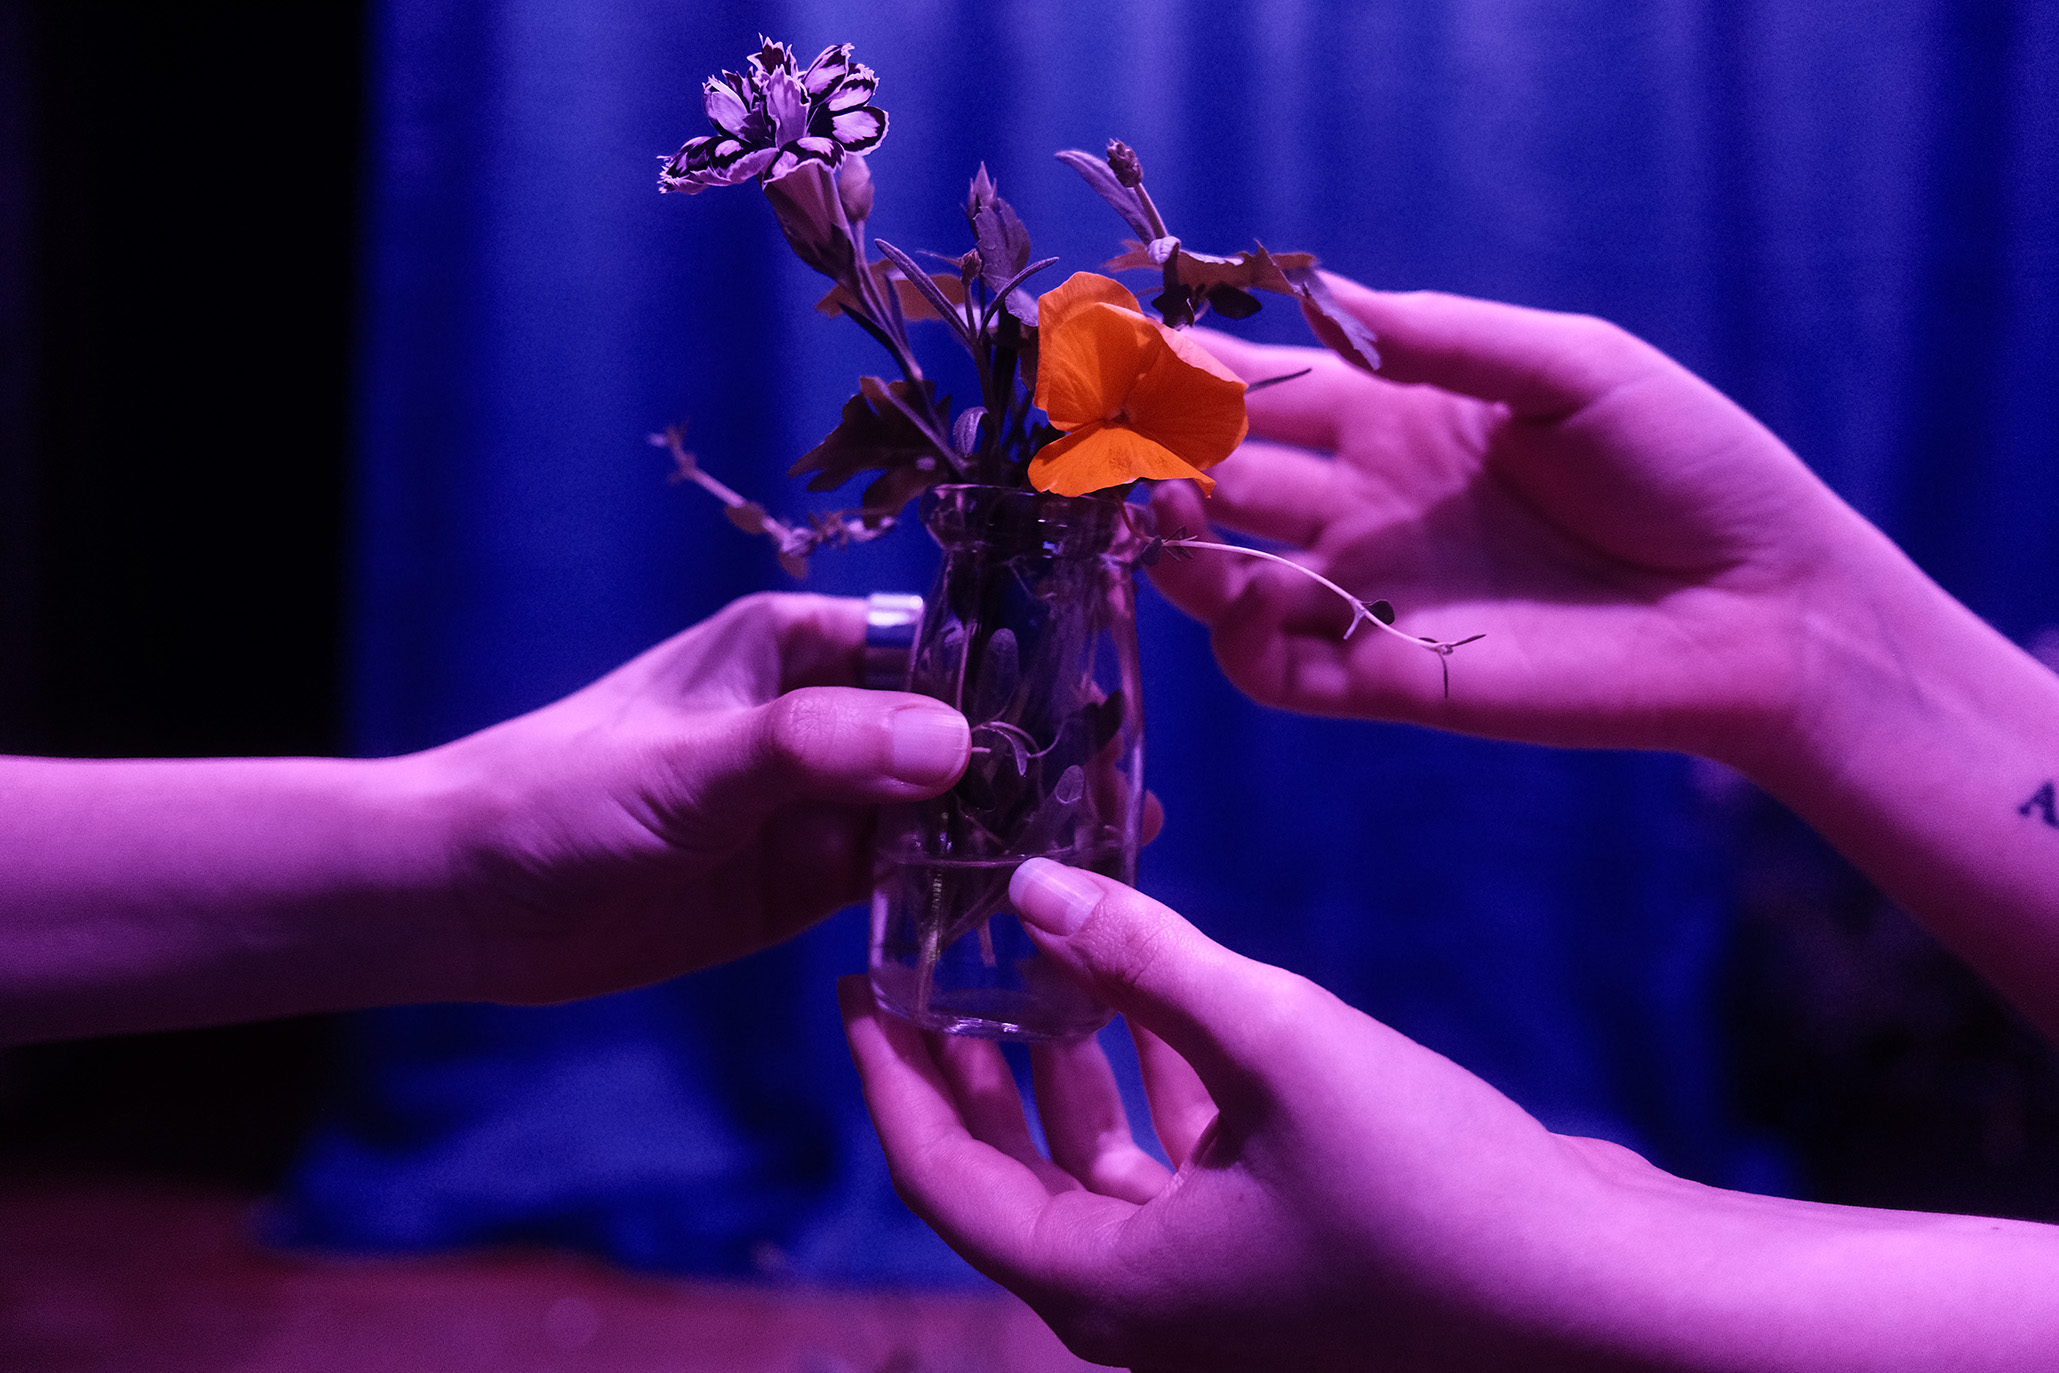 Image of Liz's thesis work. Photo shows the hands of two figures handing off a glass bottle filled with water, herbs, and flowers